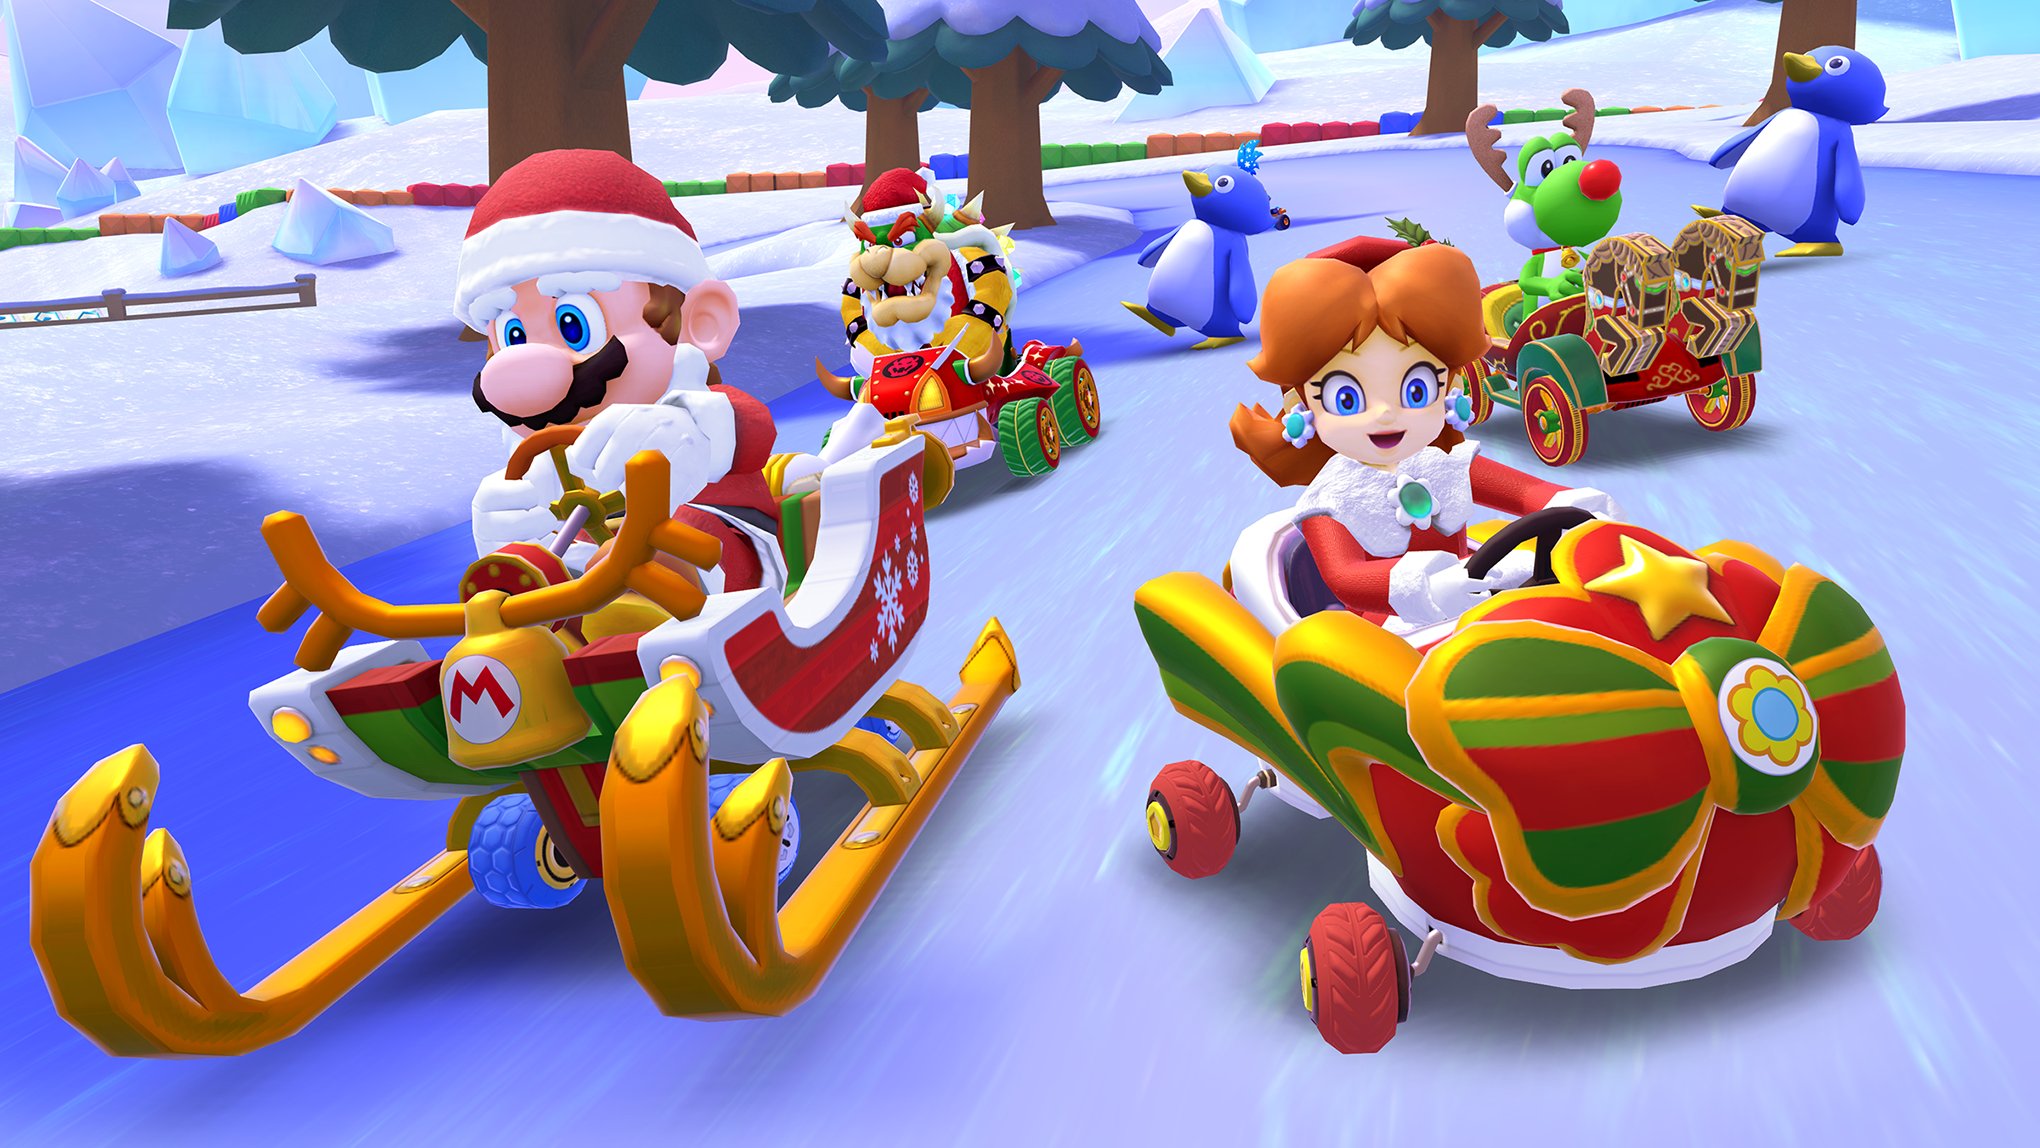 Mario Kart Tour on X: The Berlin Tour is almost over. Thanks for racing!  Next up in #MarioKartTour is the Cat Tour!  / X